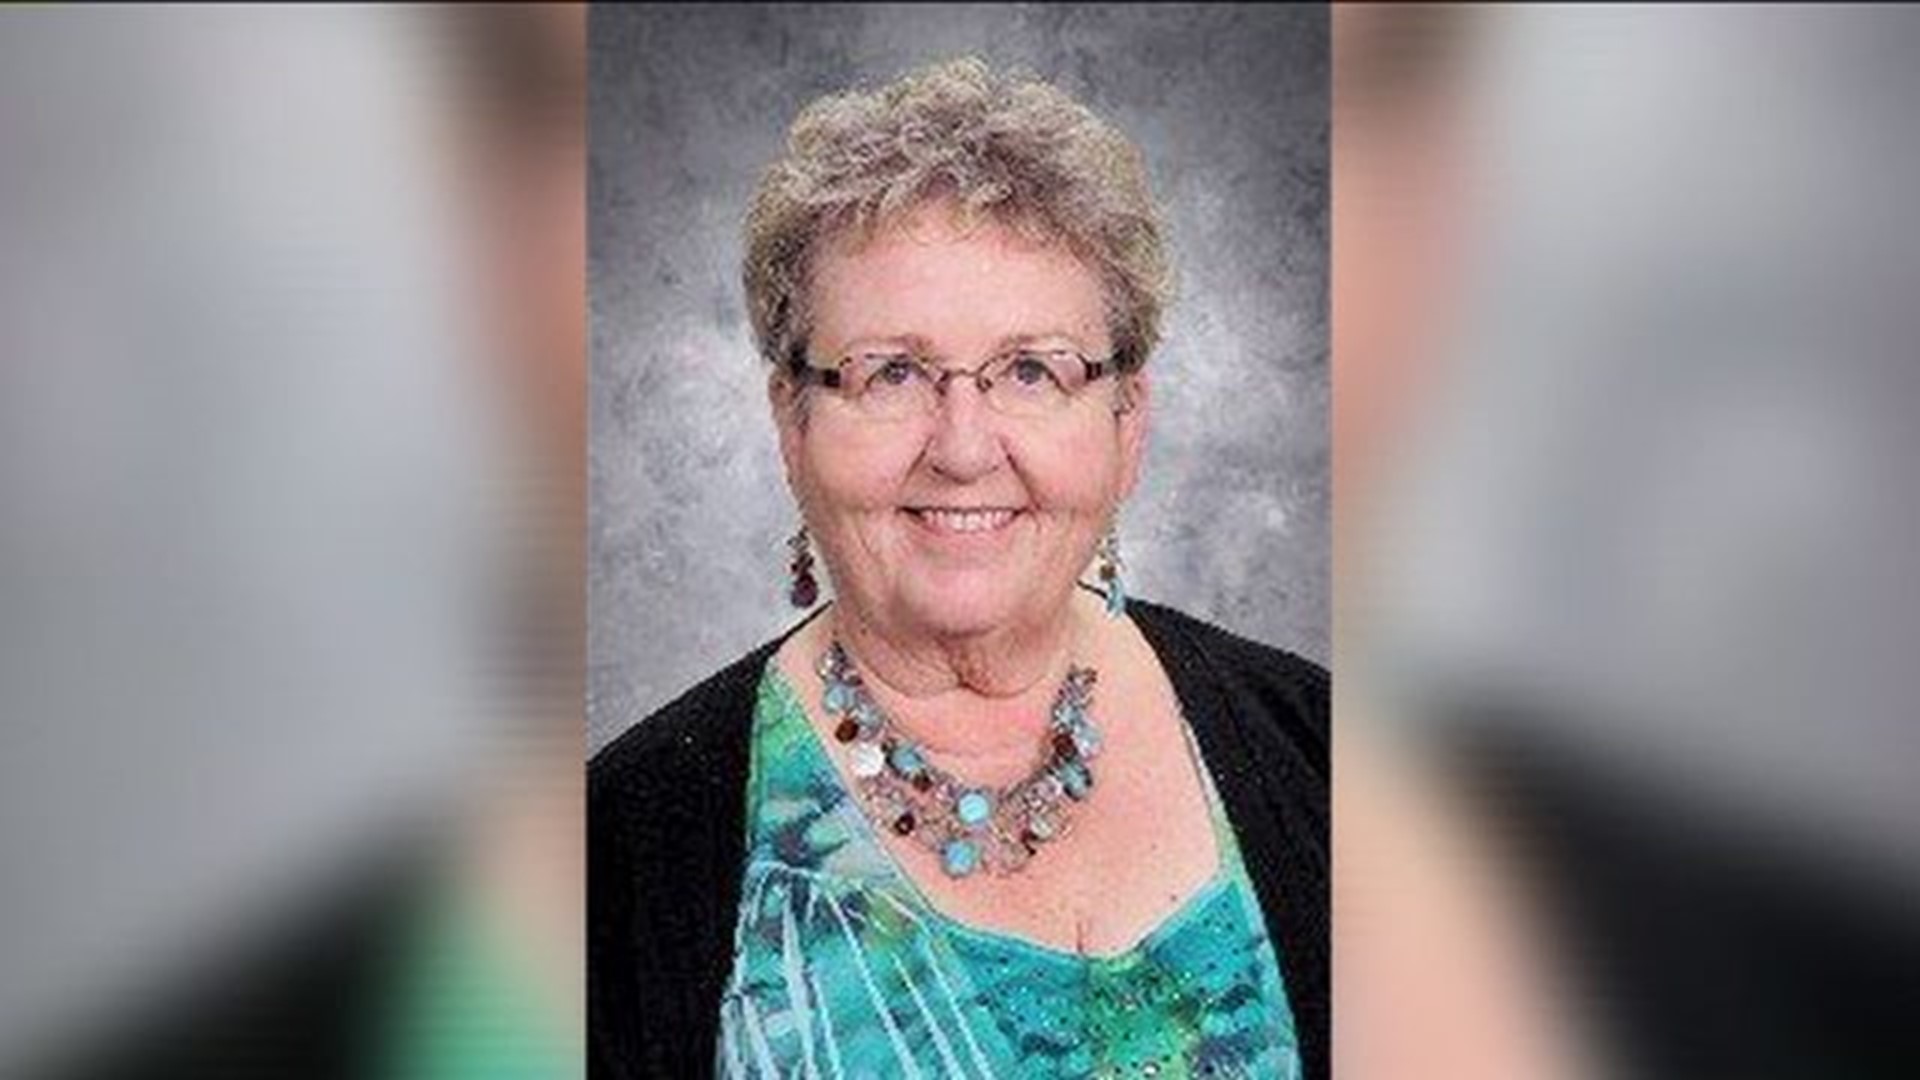 More Information On Accient That Killed RHAM Middle School Teacher